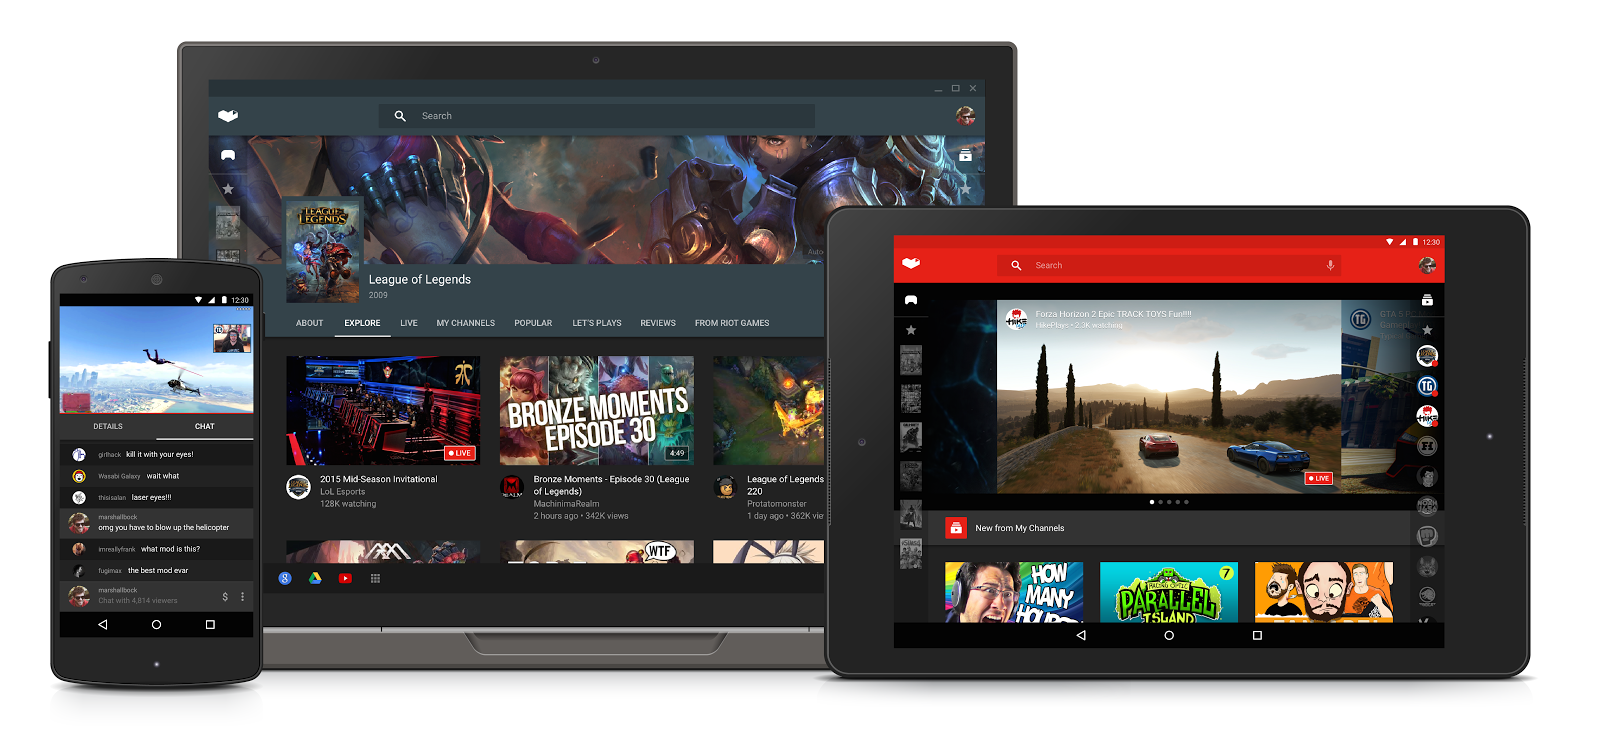 YouTube Launches YouTube Gaming to Take on Twitch